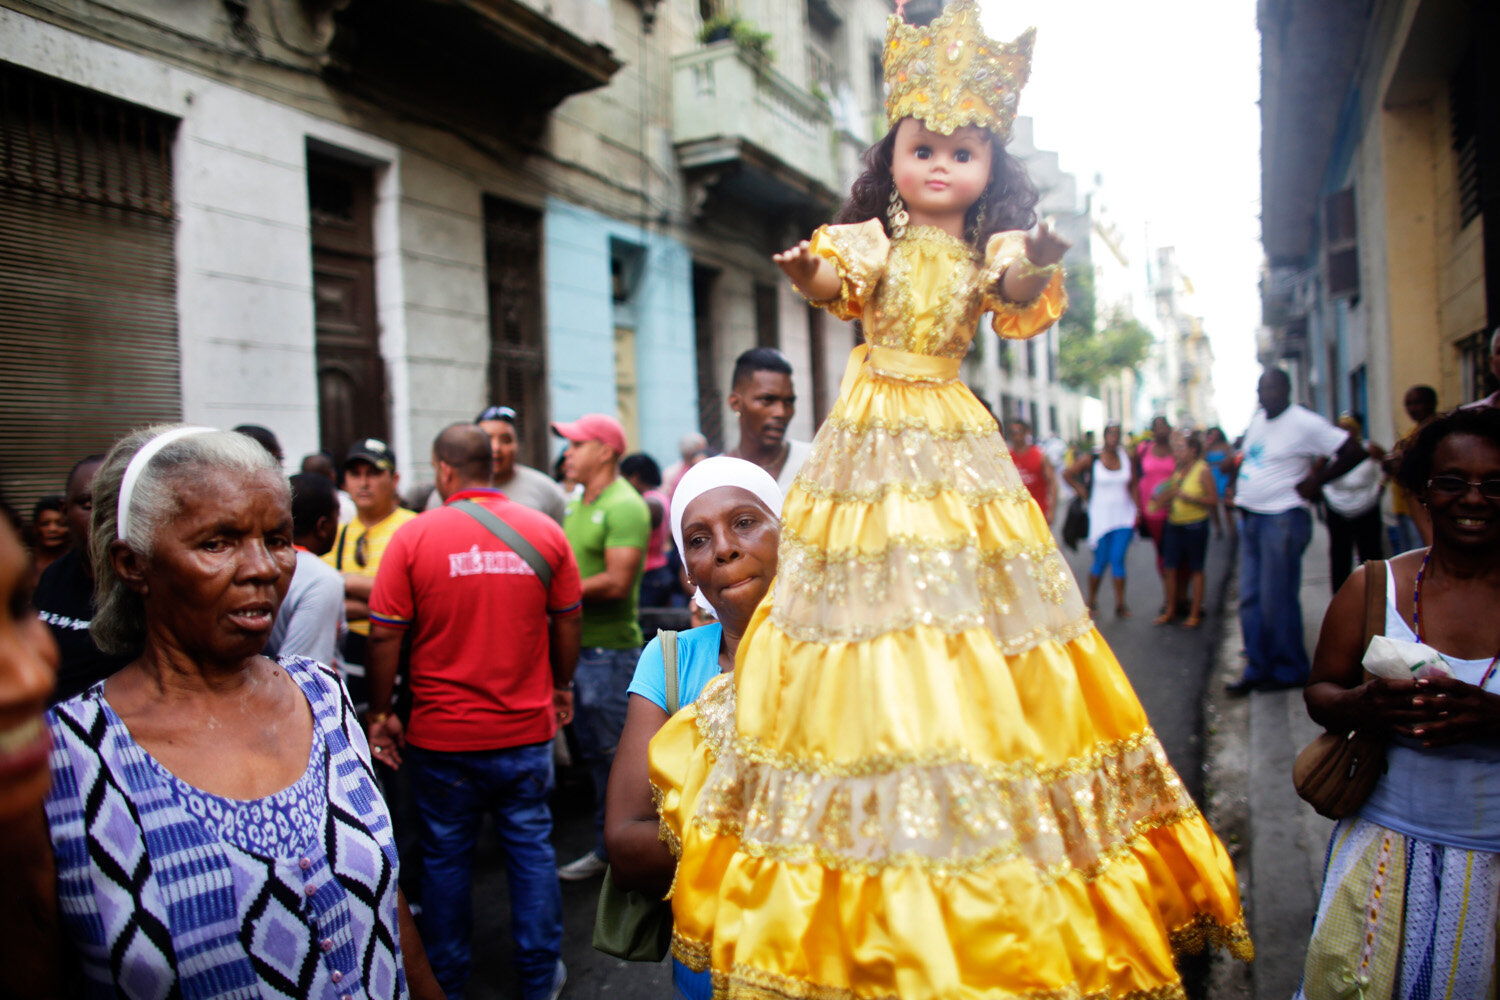  A Cuban woman carries a doll symbolizing Our Lady of Charity saint and at the same time Oshun, Afro-Cuban goddess,  during a procession for Cuba’s patron saint Virgen de la Caridad de Cobre, 2015
                      